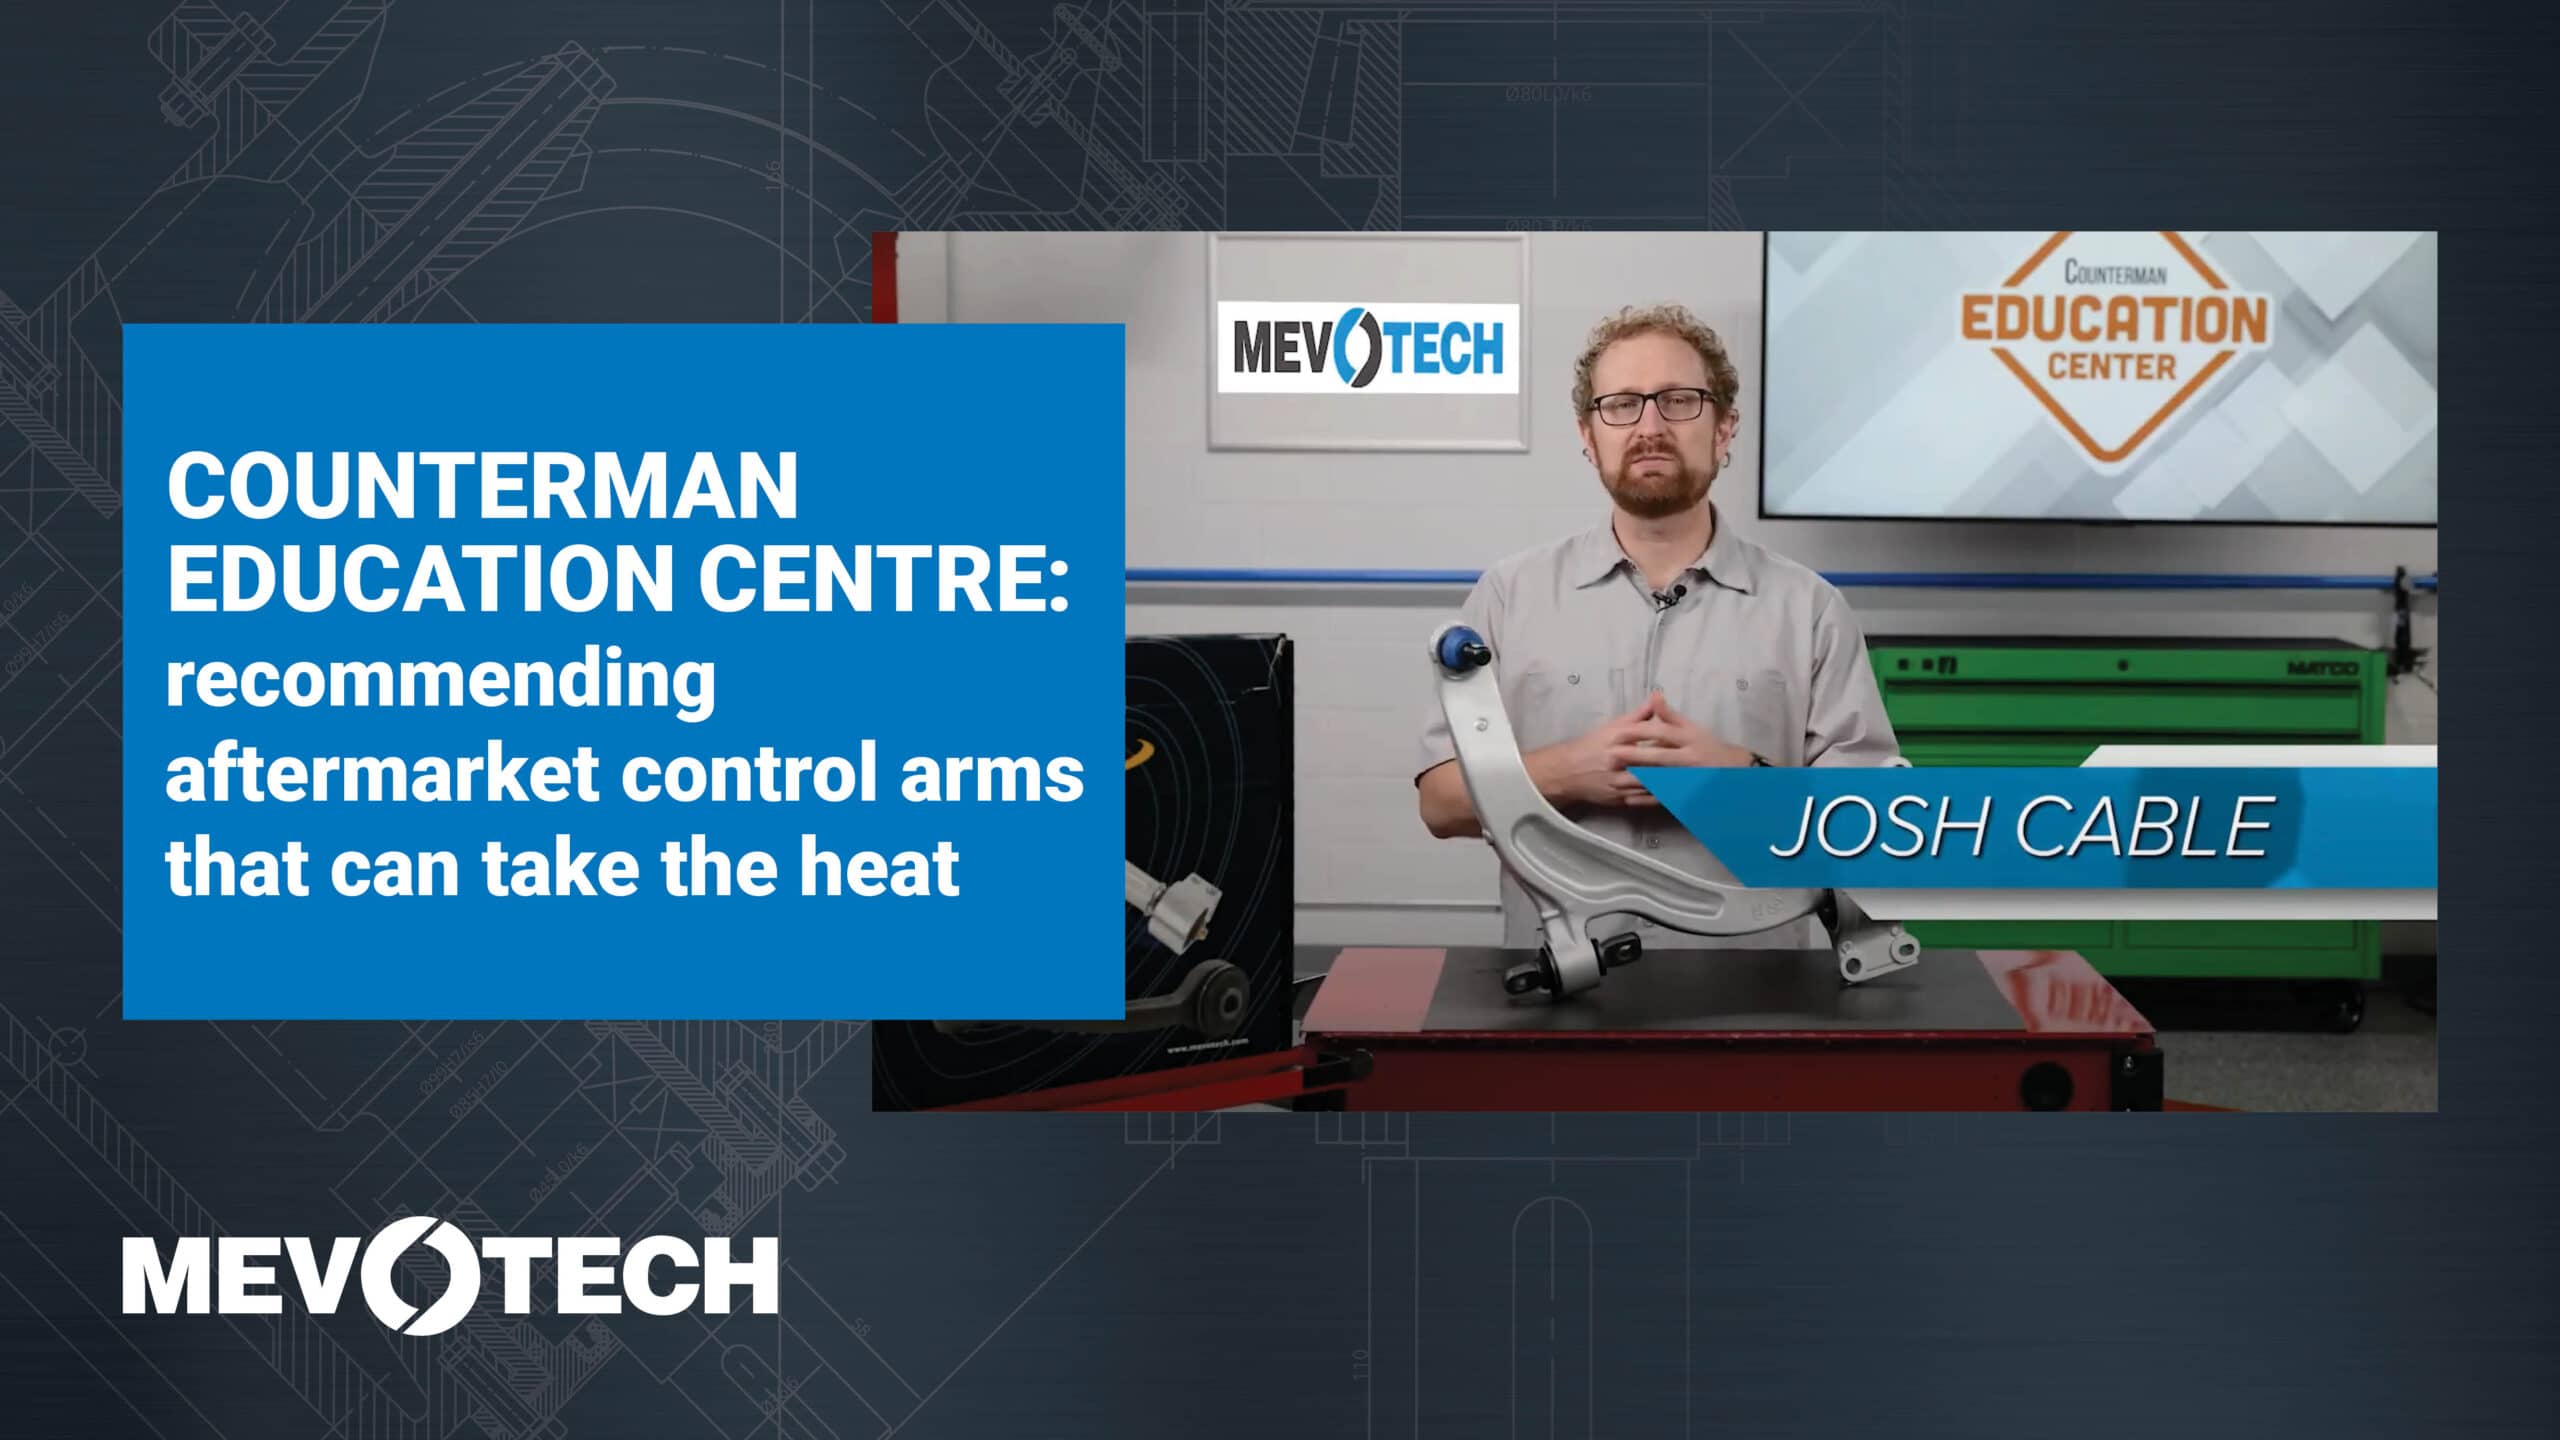 COUNTERMAN EDUCATION CENTRE: RECOMMENDING AFTERMARKET CONTROL ARMS THAT CAN TAKE THE HEAT